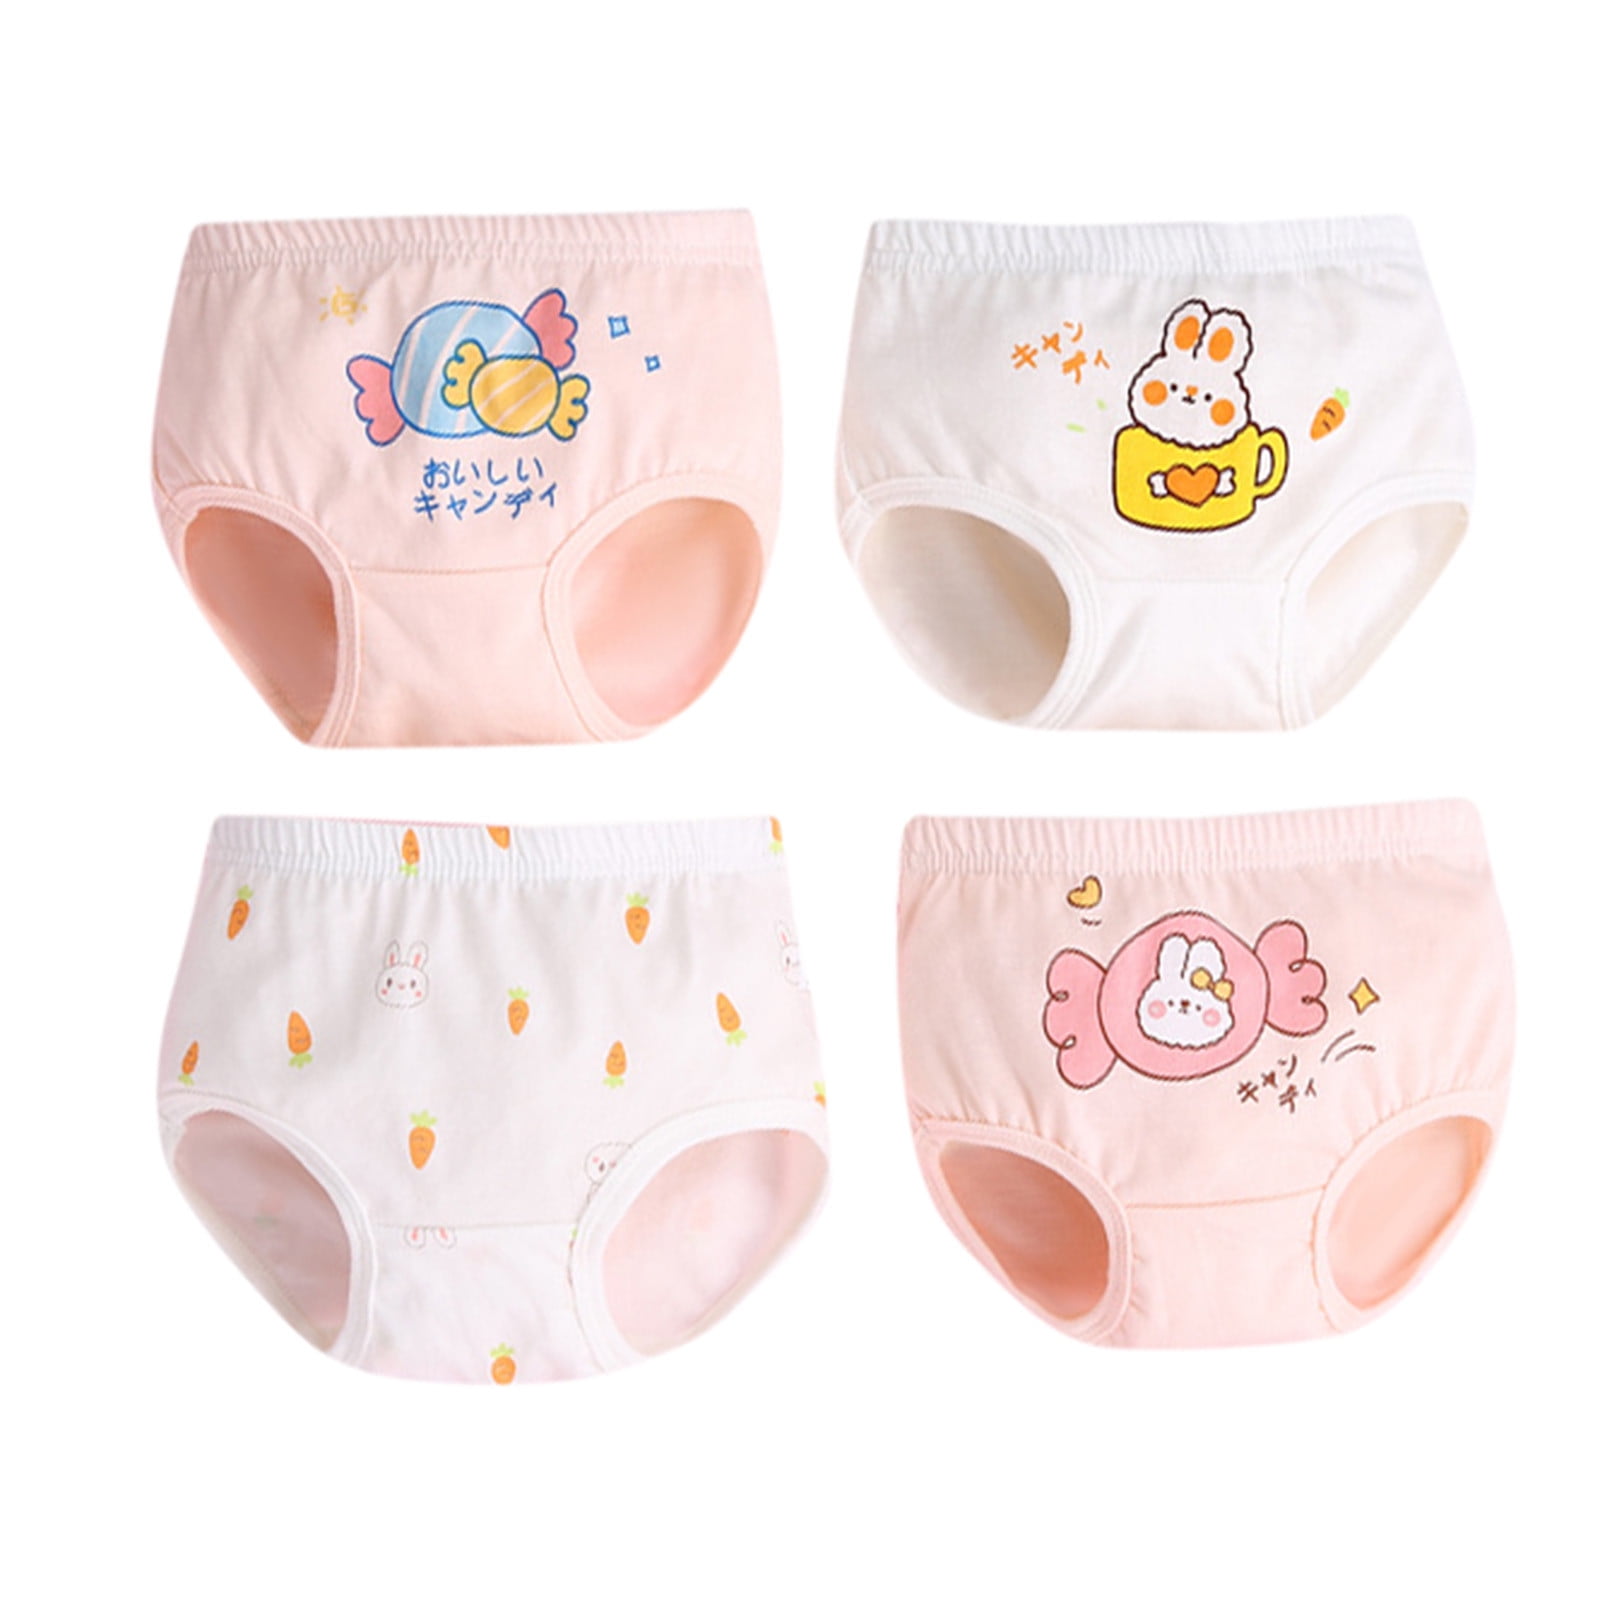 Bluey Toddler Boy's briefs. These boys underwear come in a pack of